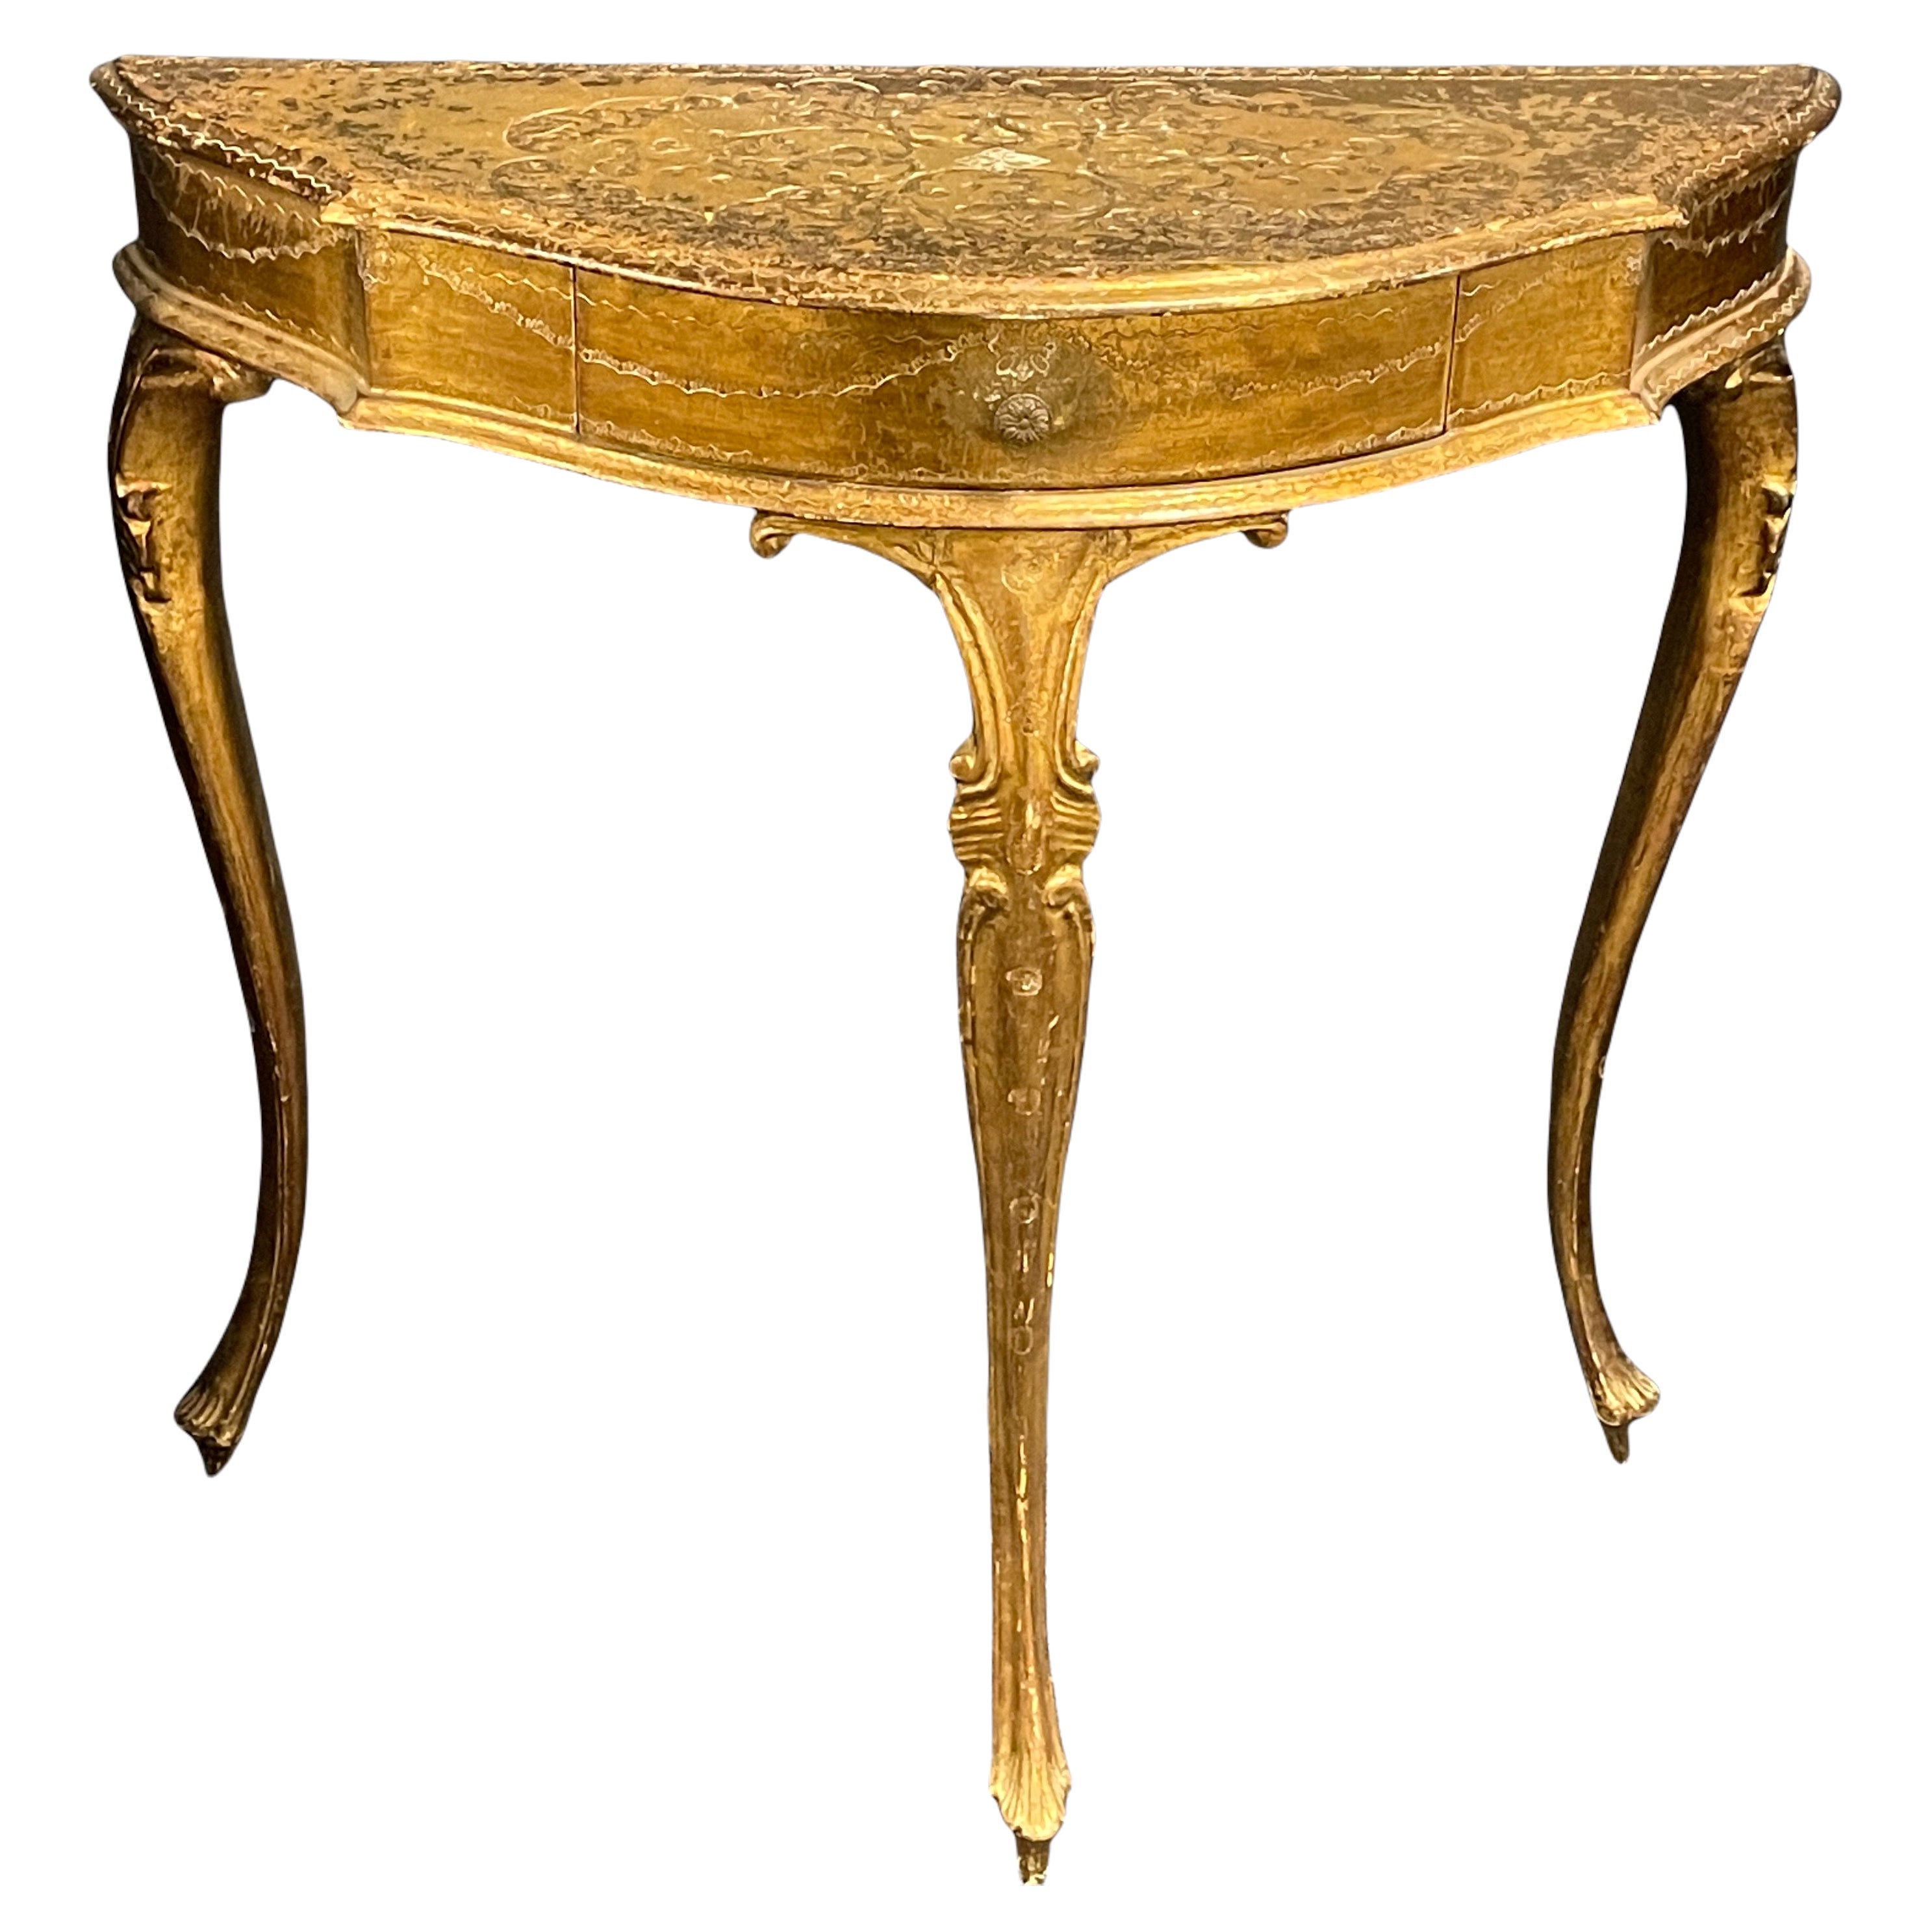 Gilded Wood Florentine Hollywood Regency Style Tole Console Table with Drawer